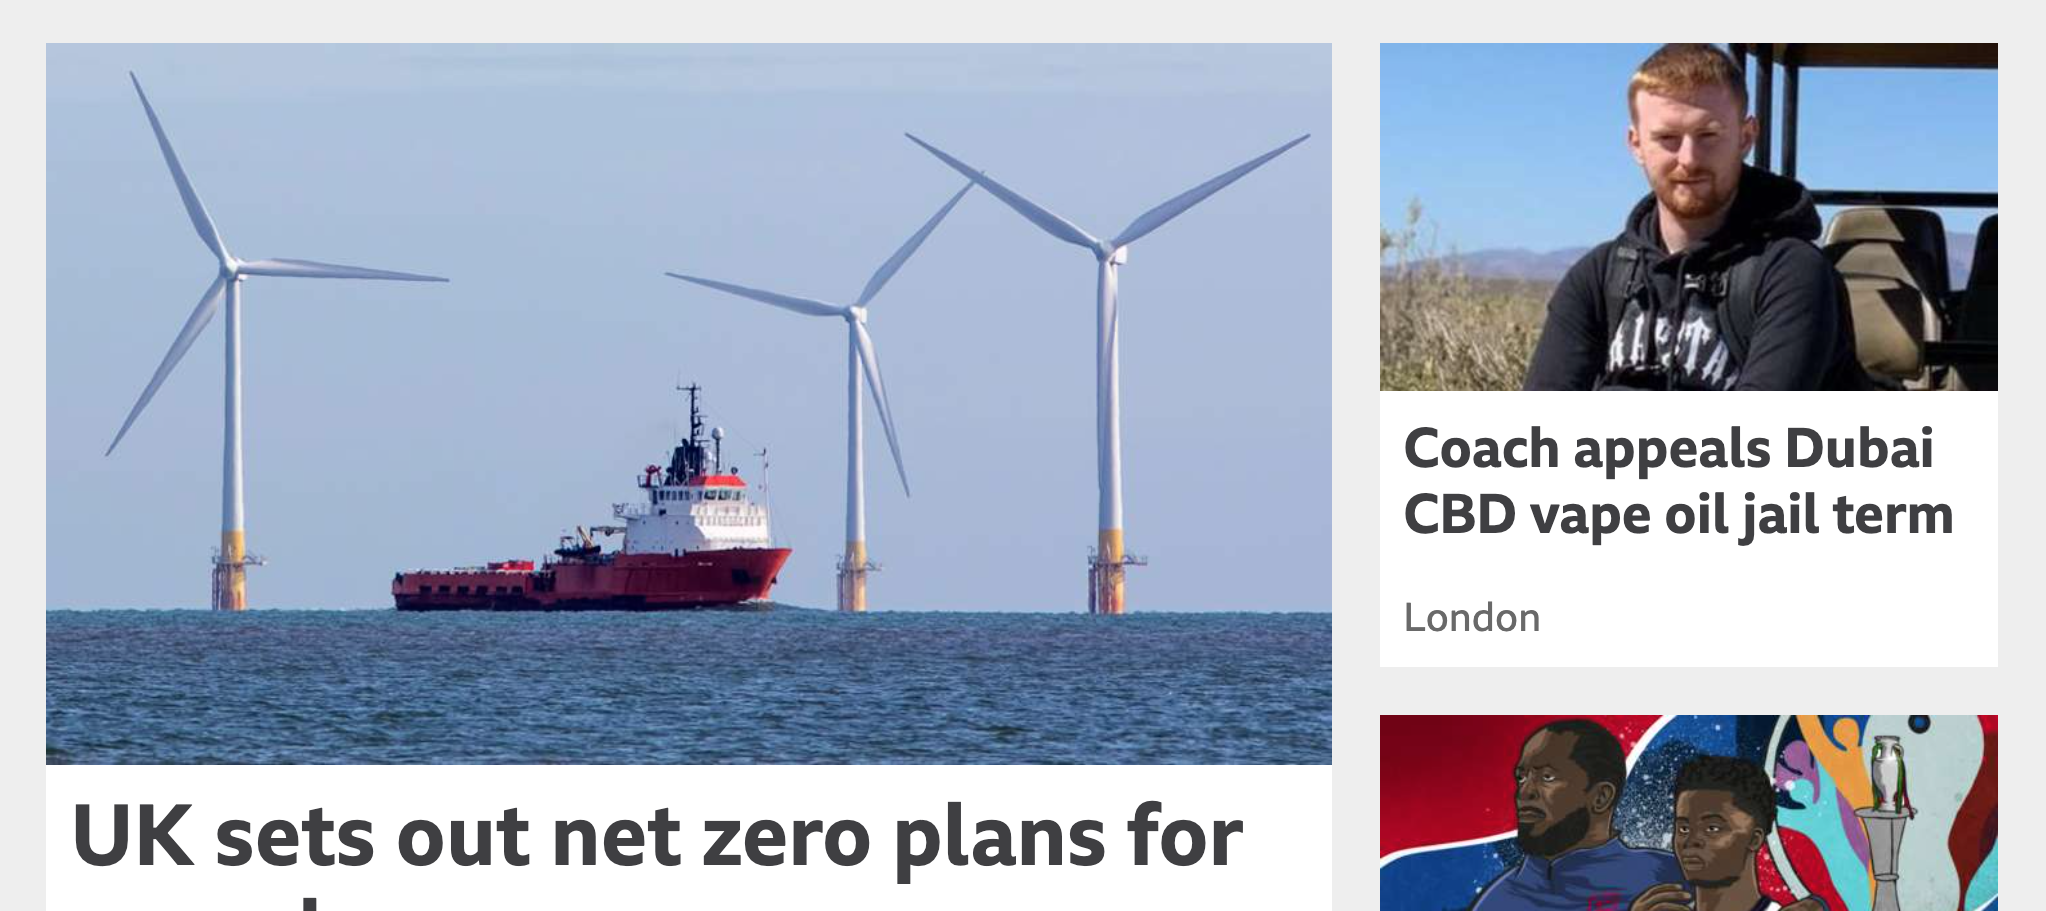 The BBC news site at the 'Very large' font size